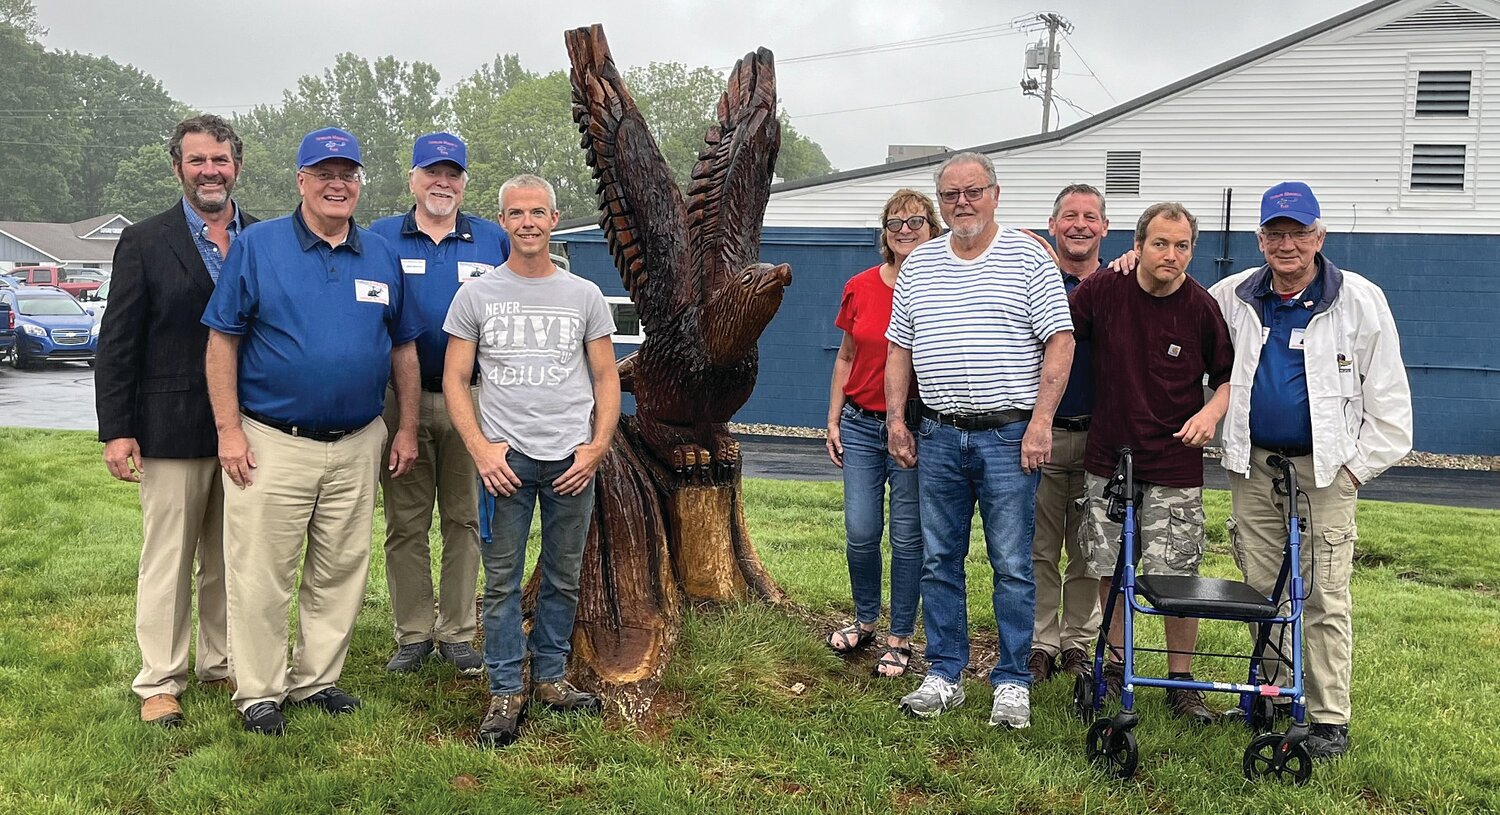 Photo Provided
Veterans Memorial Park President Kevin Cobb, board advisor Mark Eutsler, vice president Mike Spencer, artist Jesse Melvin, donors Angel and Larry Cooper, VMP board member John Douglas, donor Skyler Sells and VMP secretary Bill Durbin celebrate the completion of the American Eagle sculpture created by Melvin, a chainsaw artist, and funded through a $550 gift from the Coopers and Sells. It was sculpted from the stump that remained from a dying tree that was removed from the park. VMP is organized as a not-for-profit corporation and is recognized as tax-exempt by the IRS under Section 501(c)(3). Its mission is “Honoring All Veterans.” Various parts of the park and its operation are available for sponsorship and underwriting, including purchasing bricks that will surround the center monument. Engraved bricks will recognize veterans and those who support veterans. More information is available on the park’s Facebook page—Veterans Memorial Park – Crawfordsville.